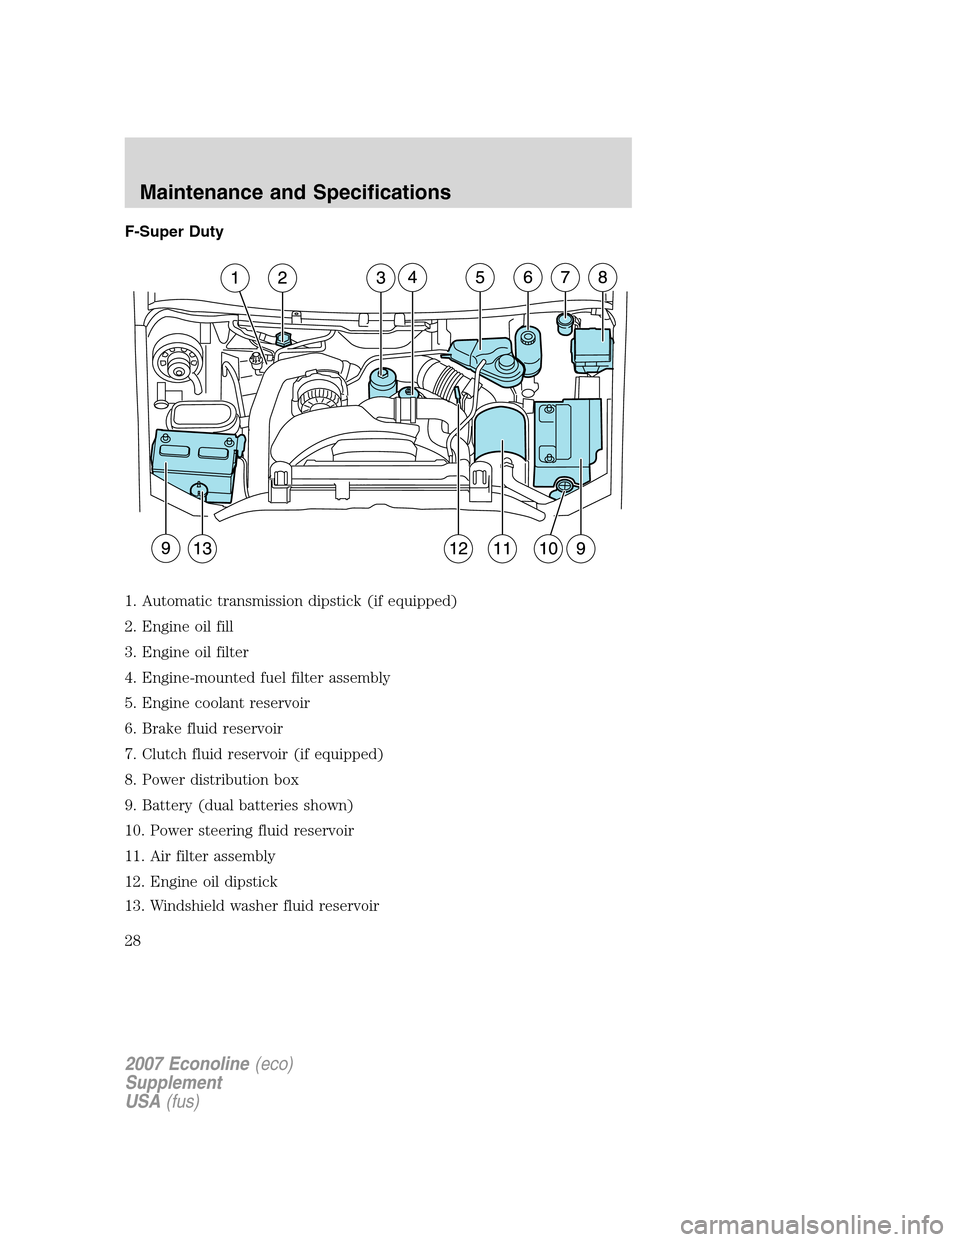 FORD SUPER DUTY 2007 1.G Diesel Supplement Manual F-Super Duty
1. Automatic transmission dipstick (if equipped)
2. Engine oil fill
3. Engine oil filter
4. Engine-mounted fuel filter assembly
5. Engine coolant reservoir
6. Brake fluid reservoir
7. Clu